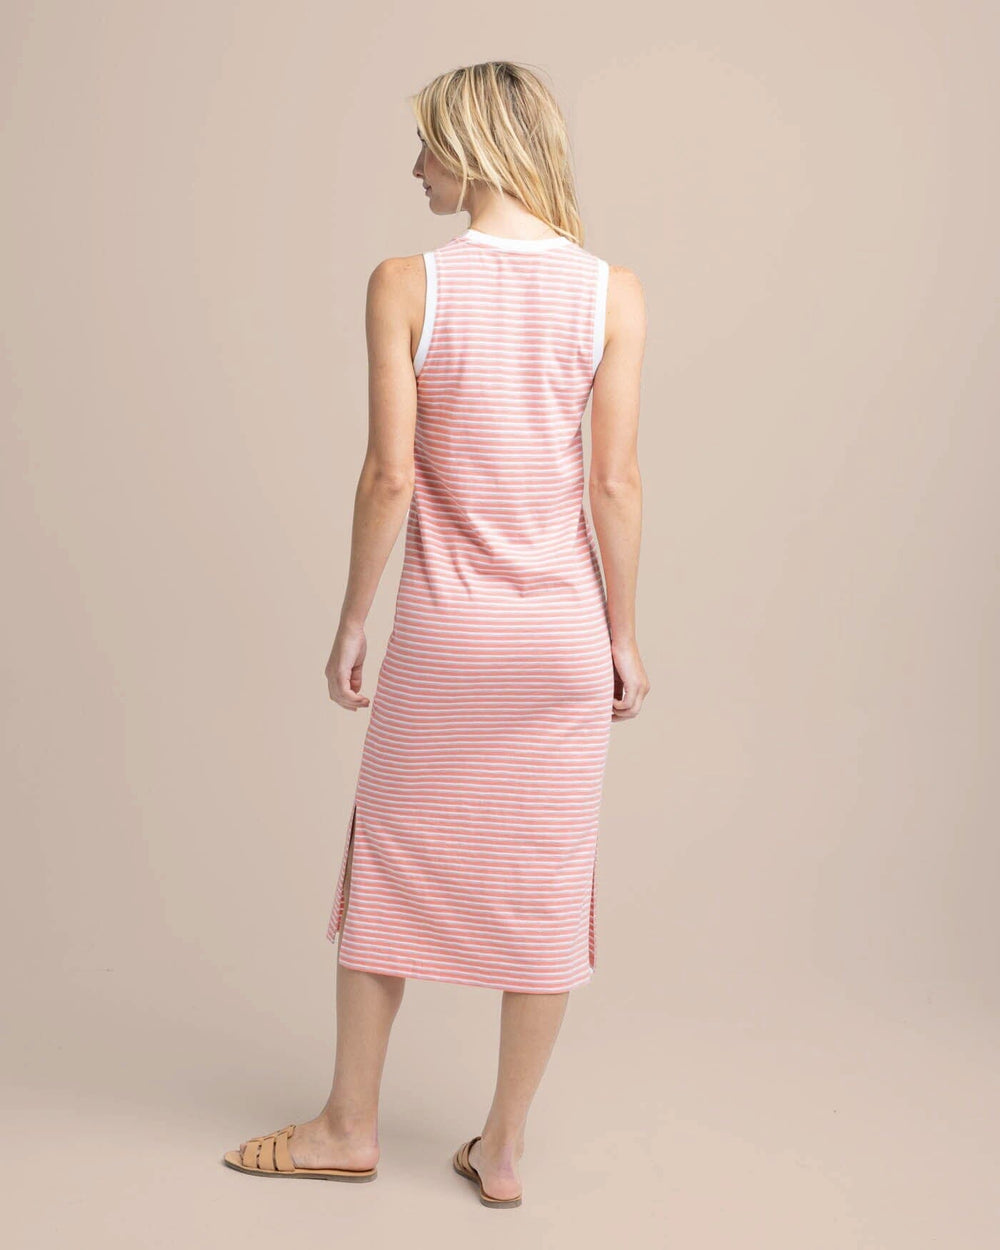 The back view of the Southern Tide Sun Farer Stripe Midi Tank Dress by Southern Tide - Conch Shell